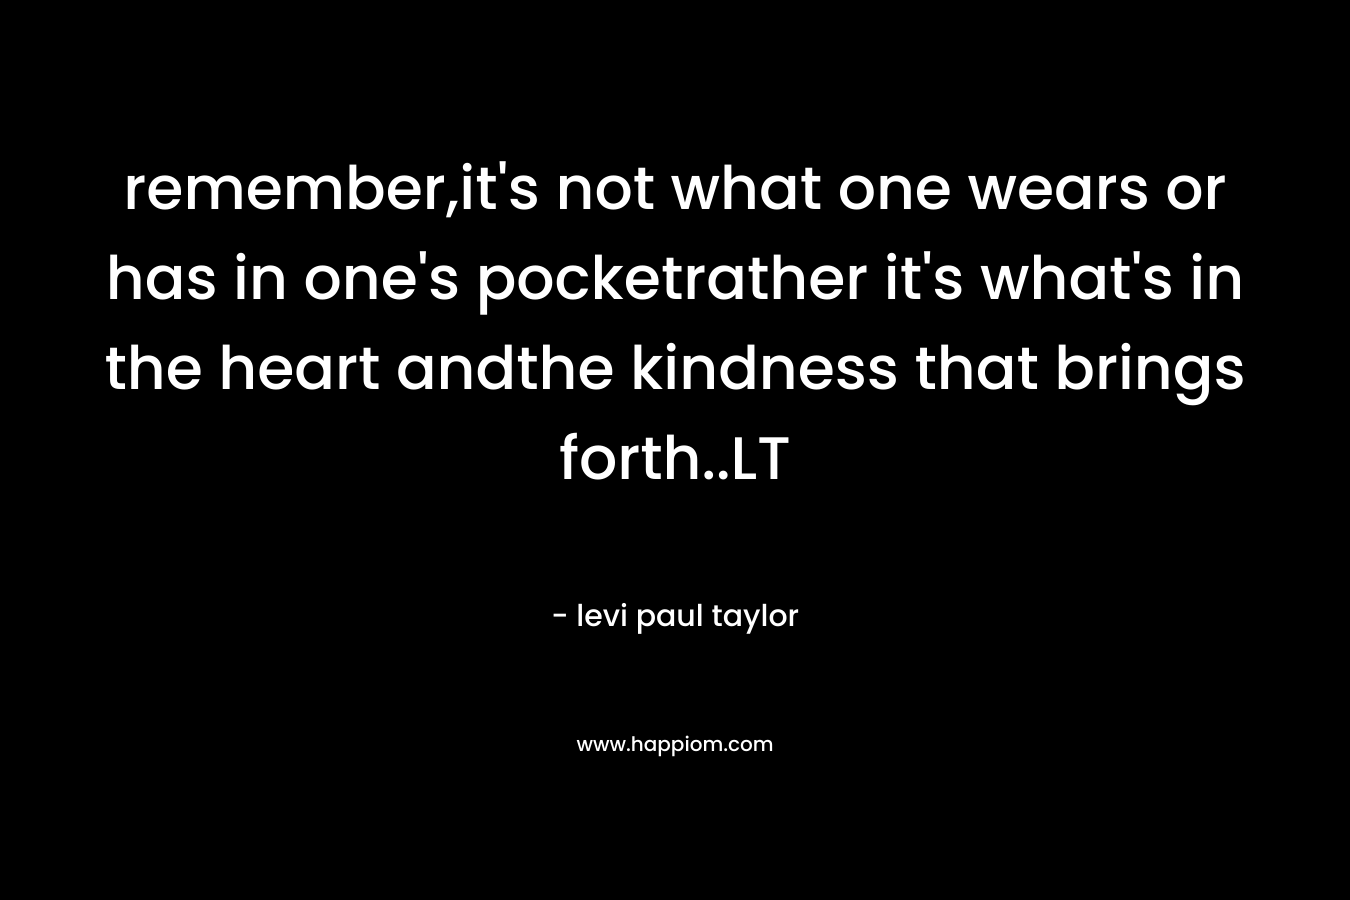 remember,it's not what one wears or has in one's pocketrather it's what's in the heart andthe kindness that brings forth..LT